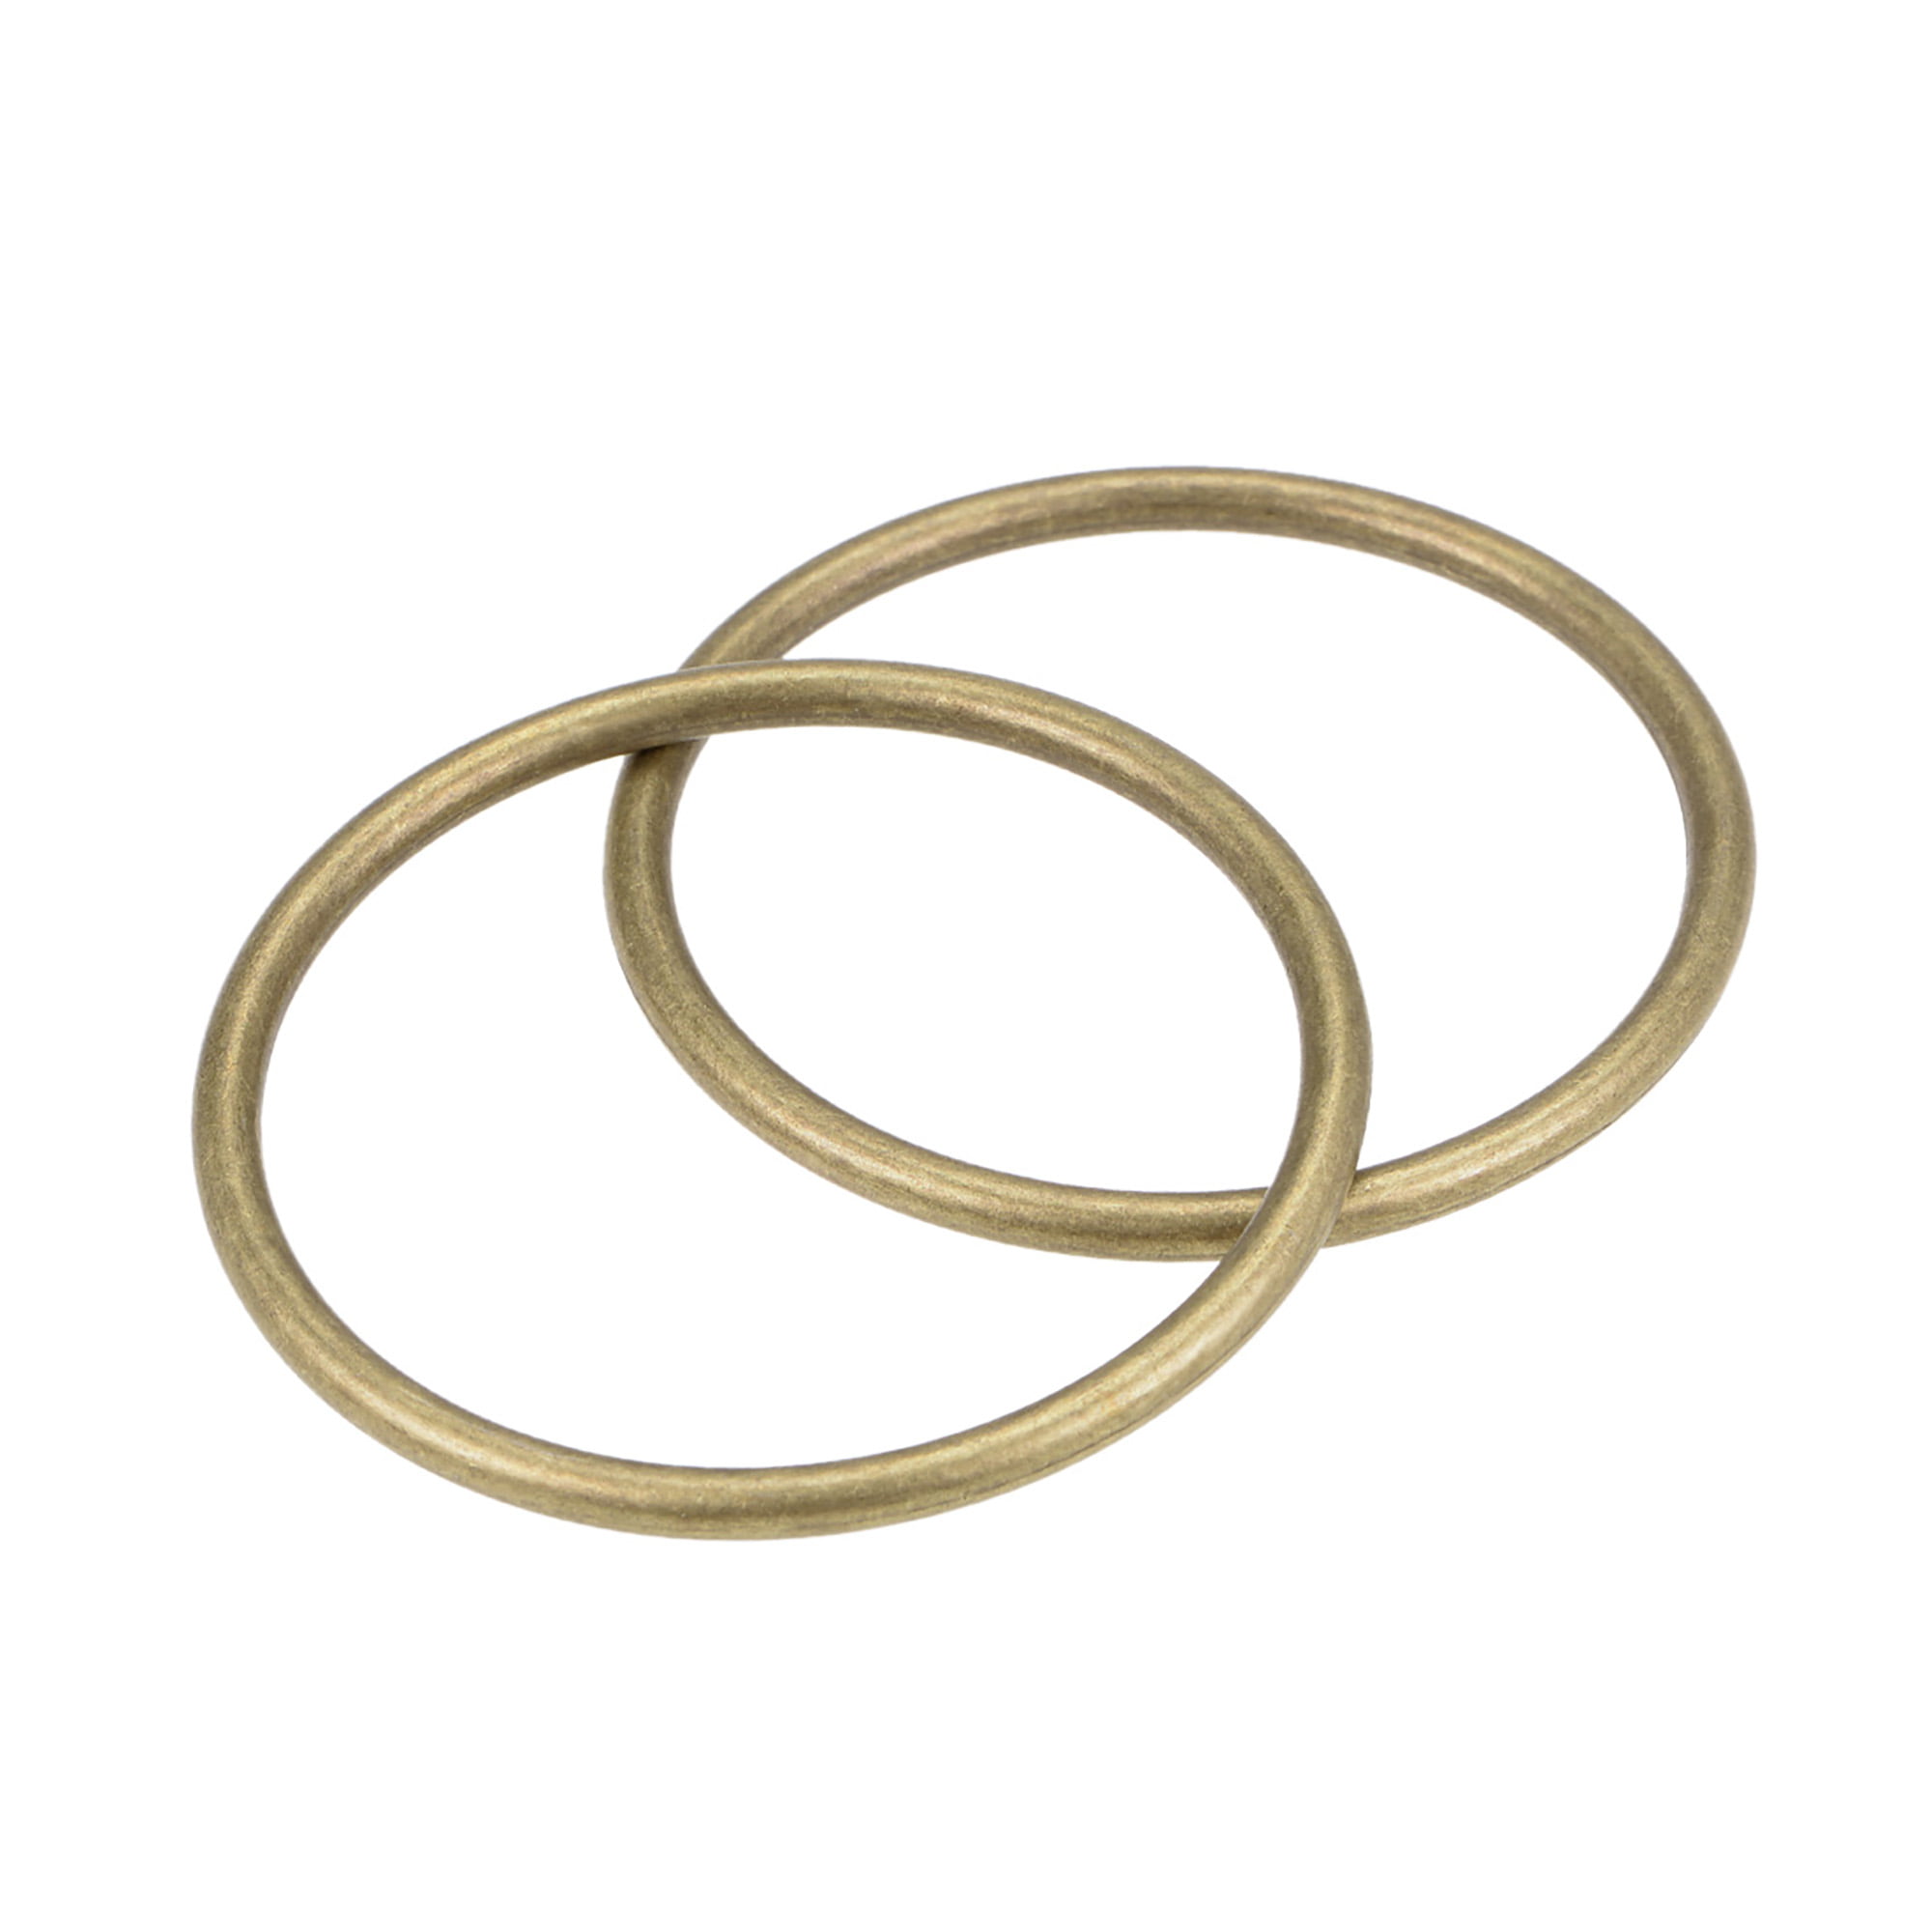 10 Pcs O Ring Buckle 1" O-Rings Gold Tone for Hardware Bags Craft DIY 25mm 